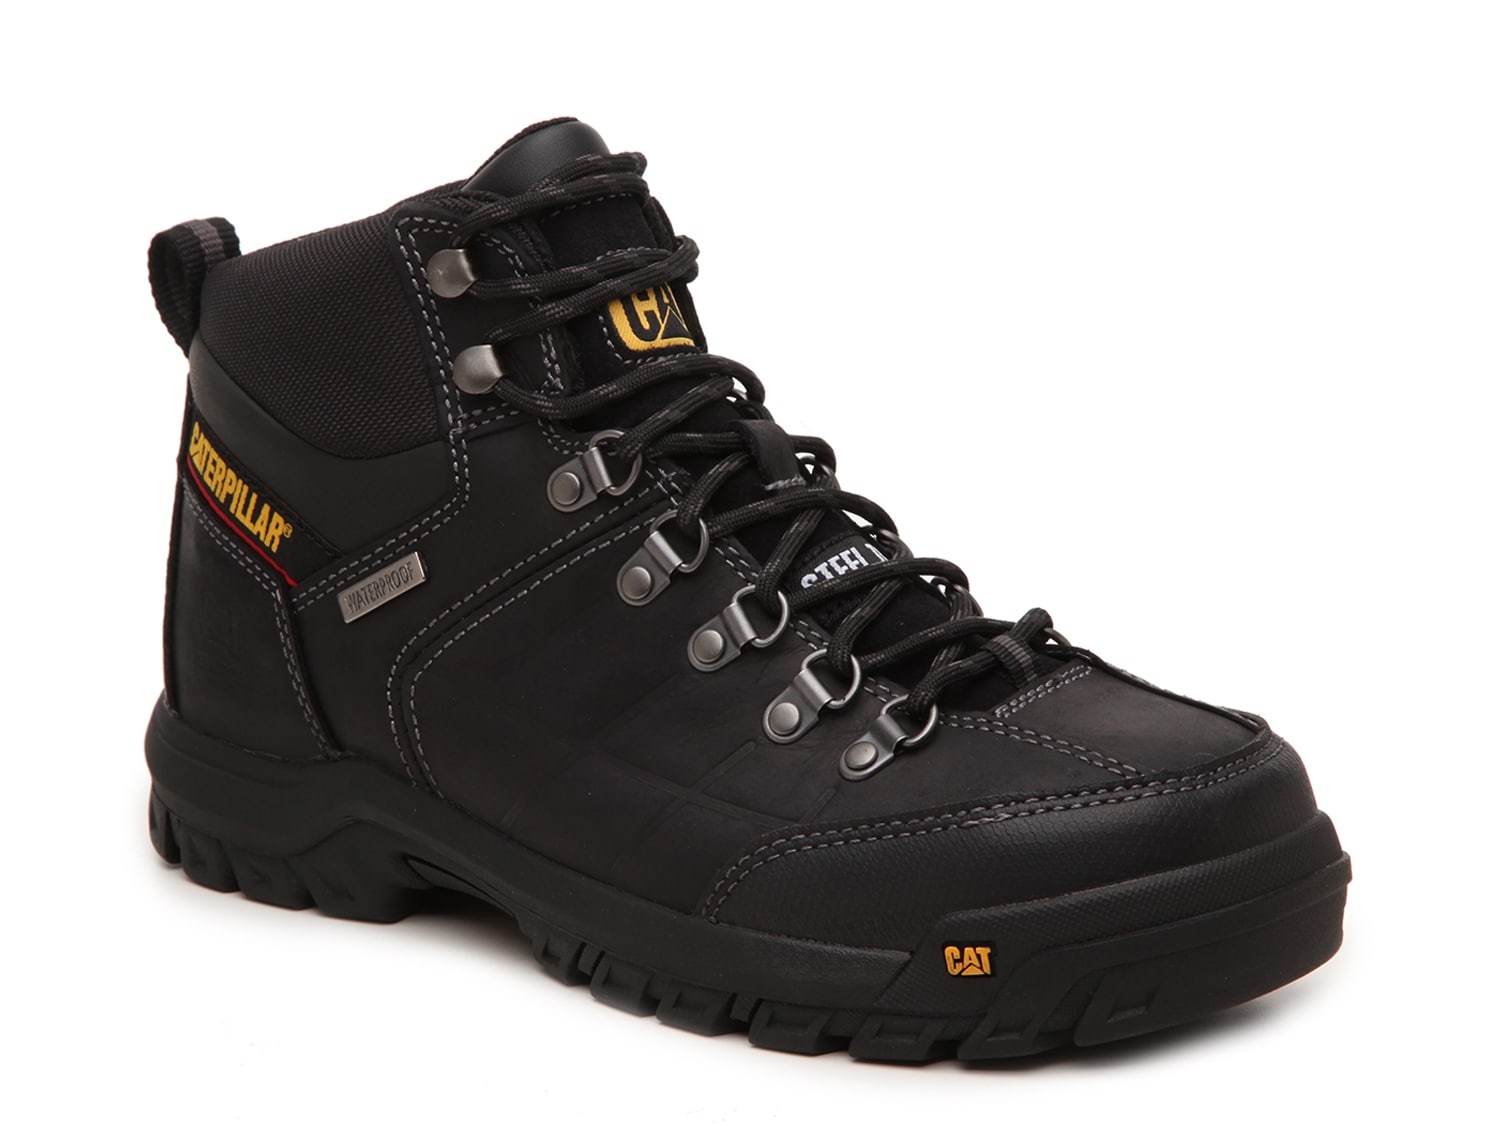 safety shoes steel toe